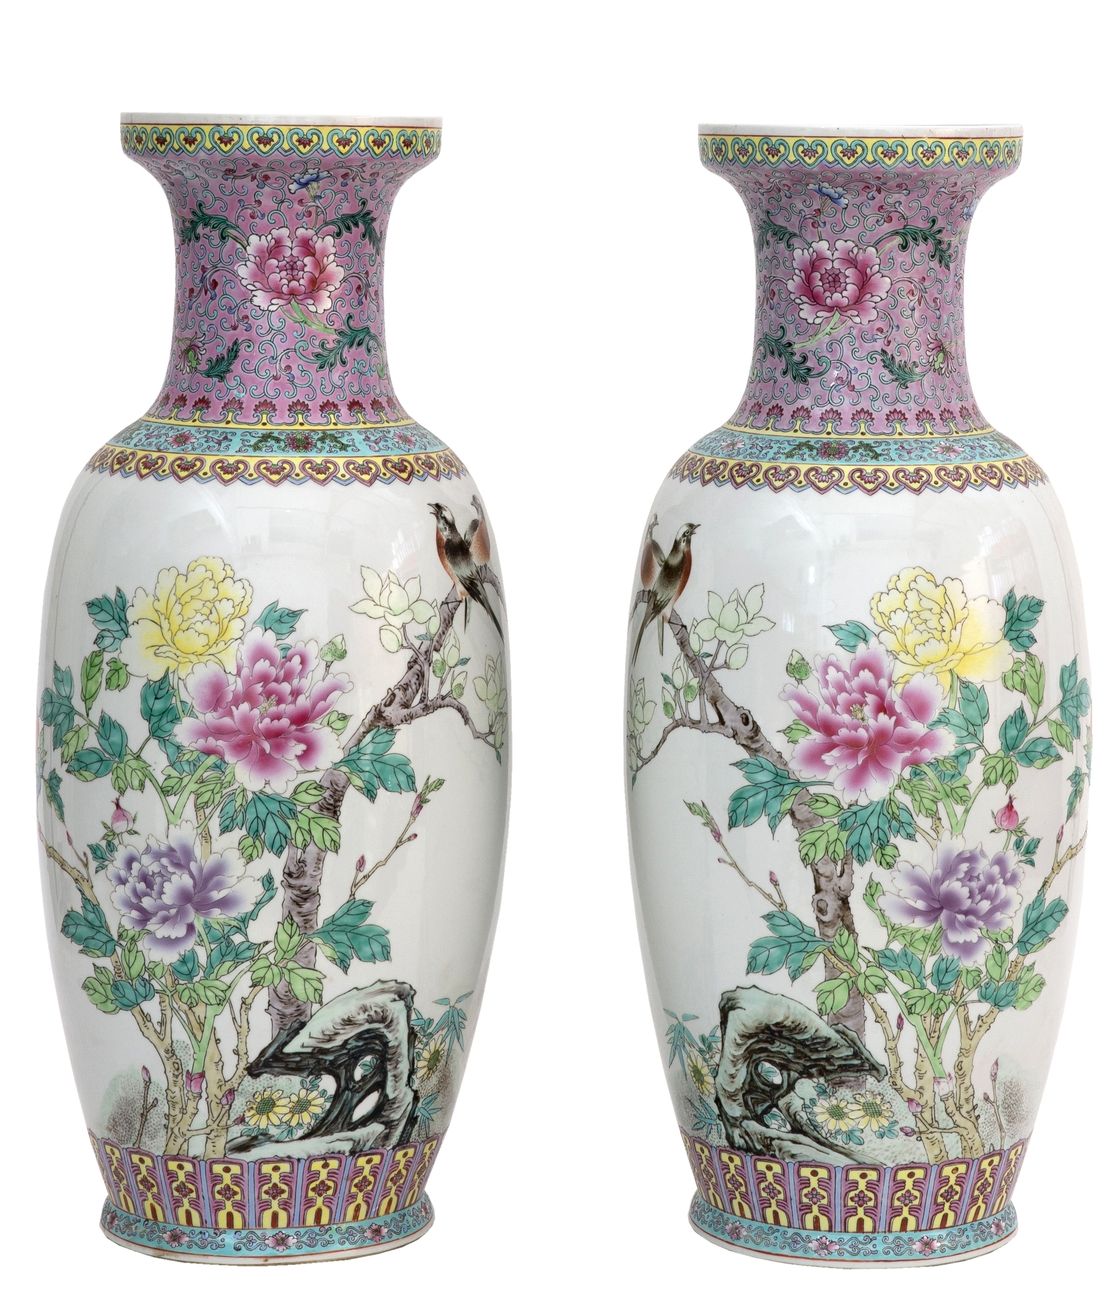 Null China, 20th century
A pair of porcelain vases decorated in Famille Rose ena&hellip;